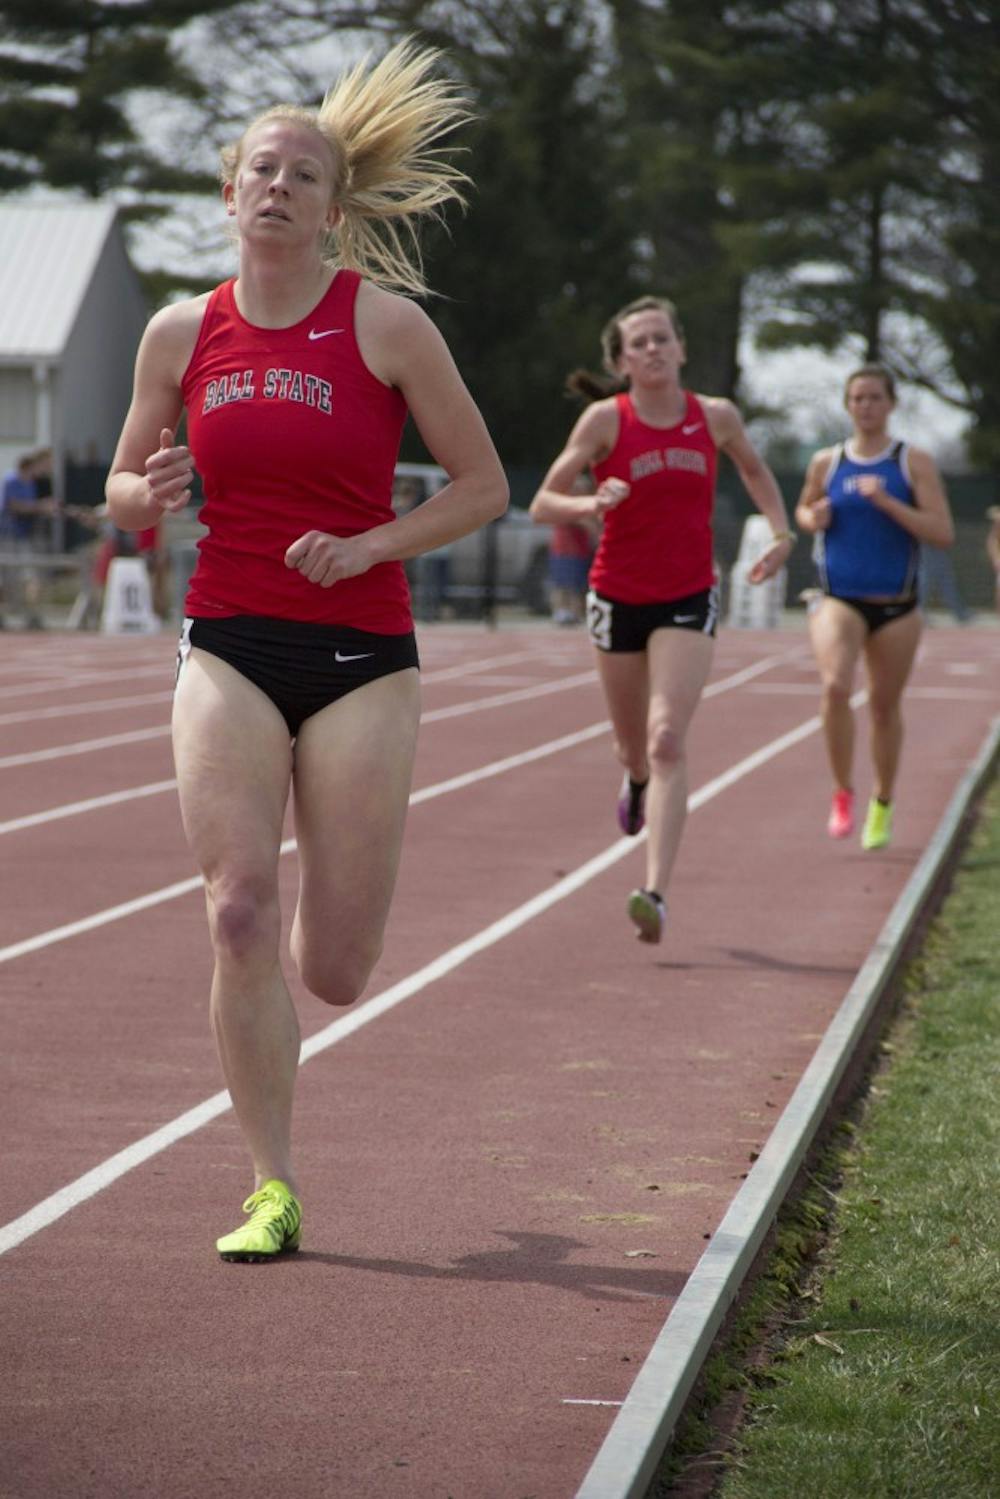 <p>Then-sophomore Daniell Dahl&nbsp;competes in the 1500 meter race during the meet against IPFW&nbsp;on April 11, 2014&nbsp;at the University Track. DN PHOTO EMMA ROGERS</p>